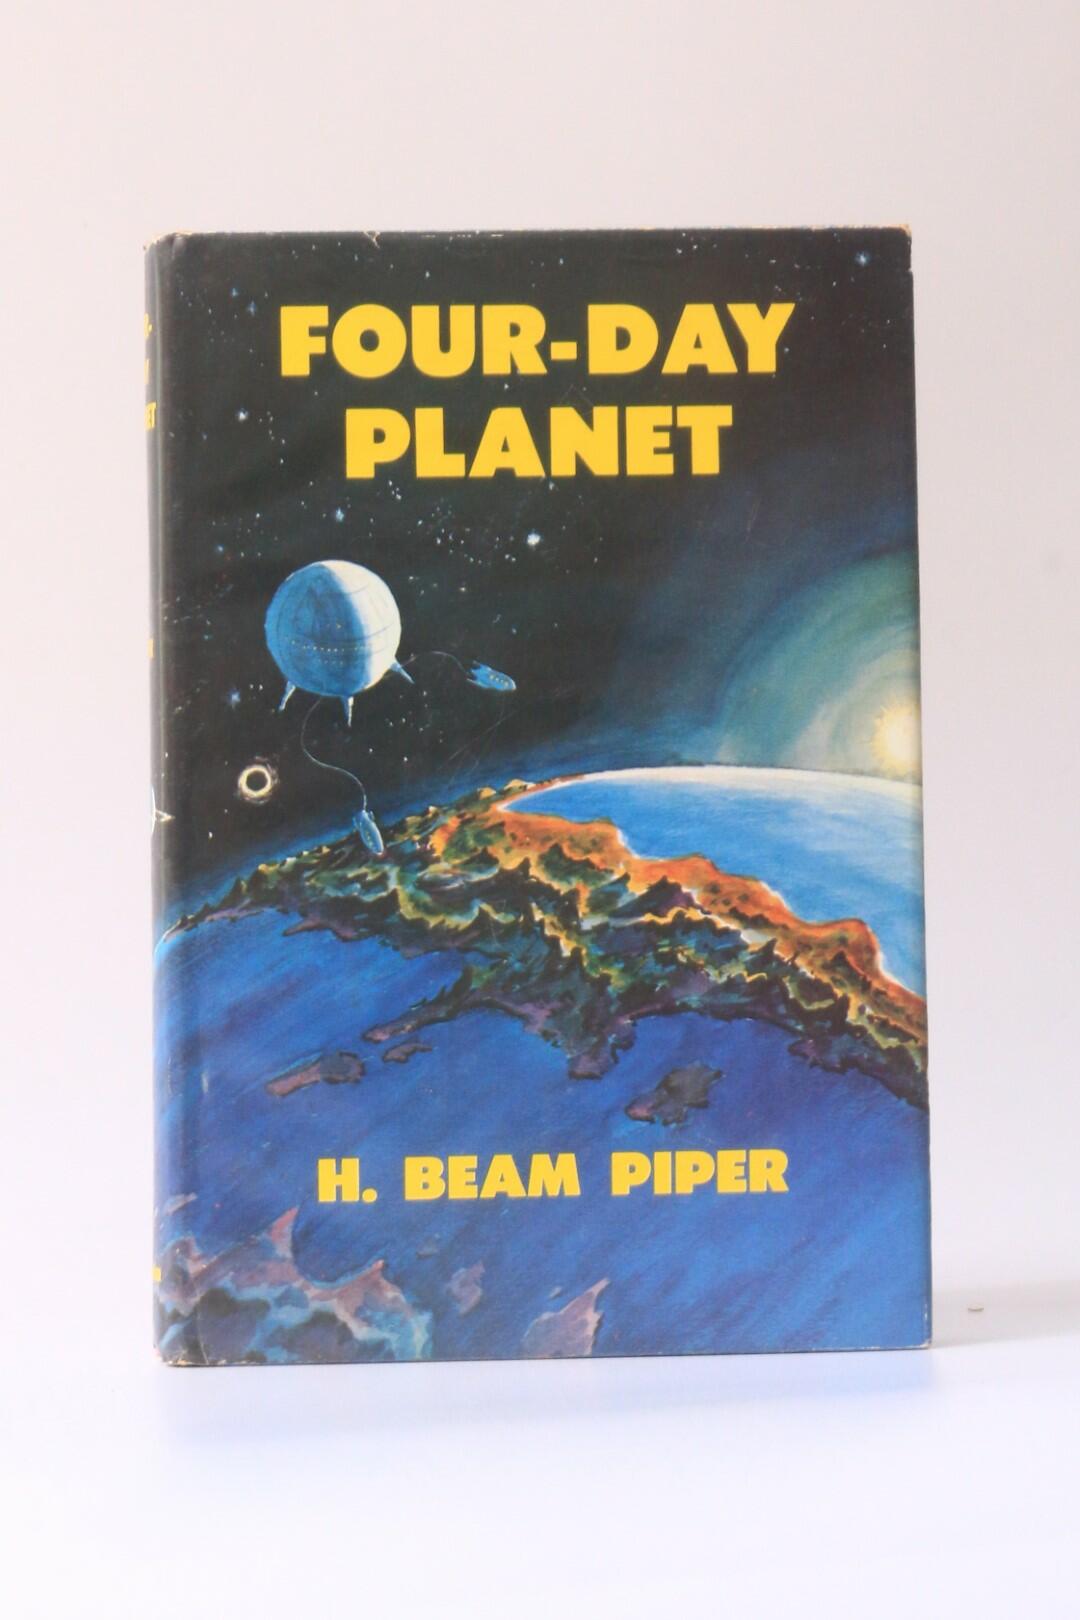 H. Beam Piper - Four-Day Planet - G.P. Putnam, 1961, First Edition.